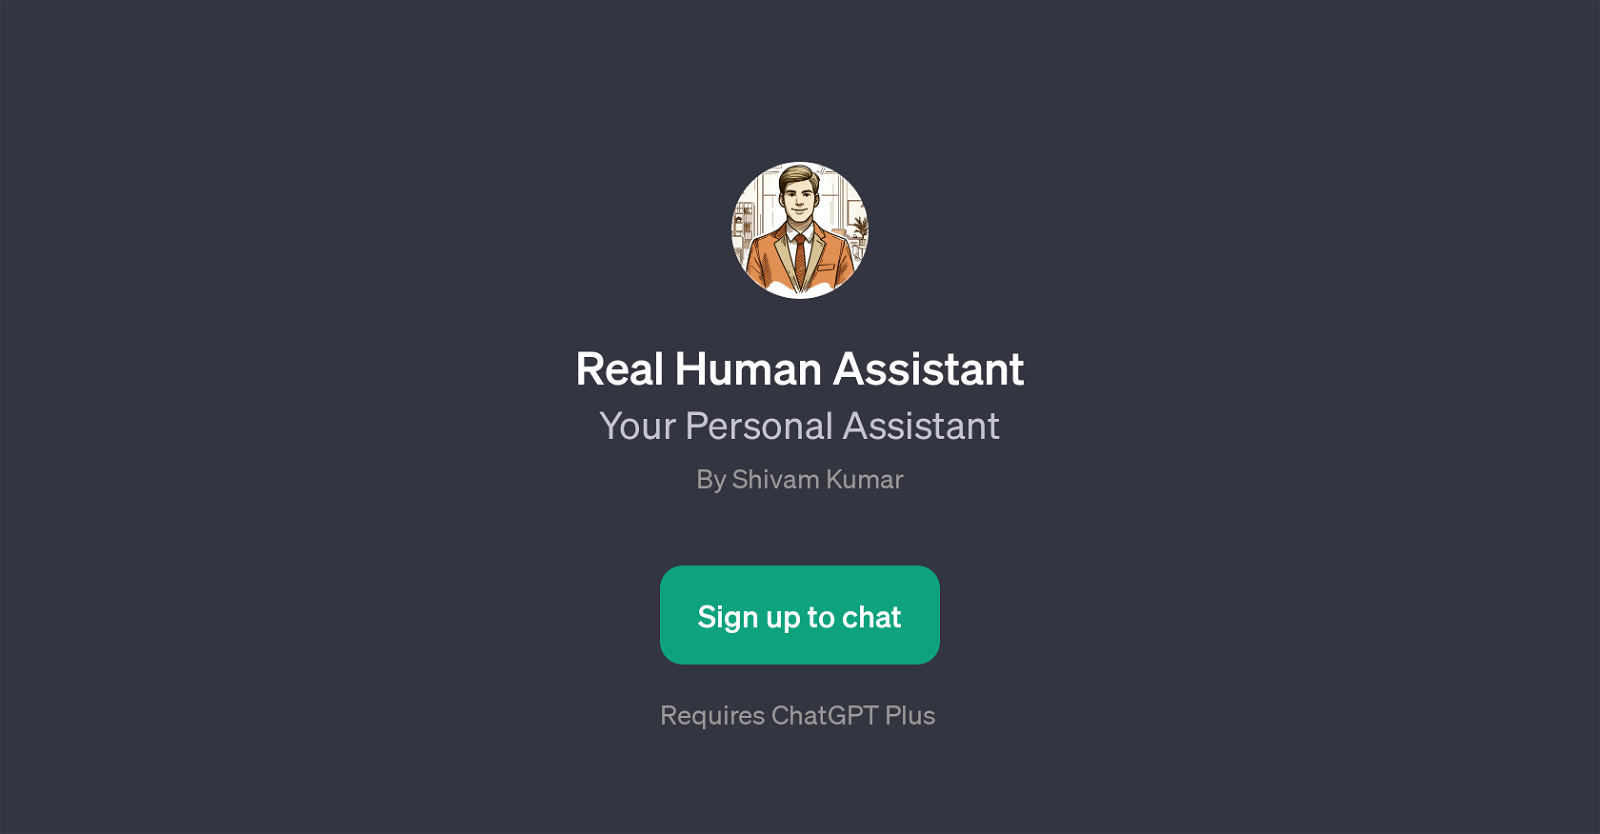 Real Human Assistant website